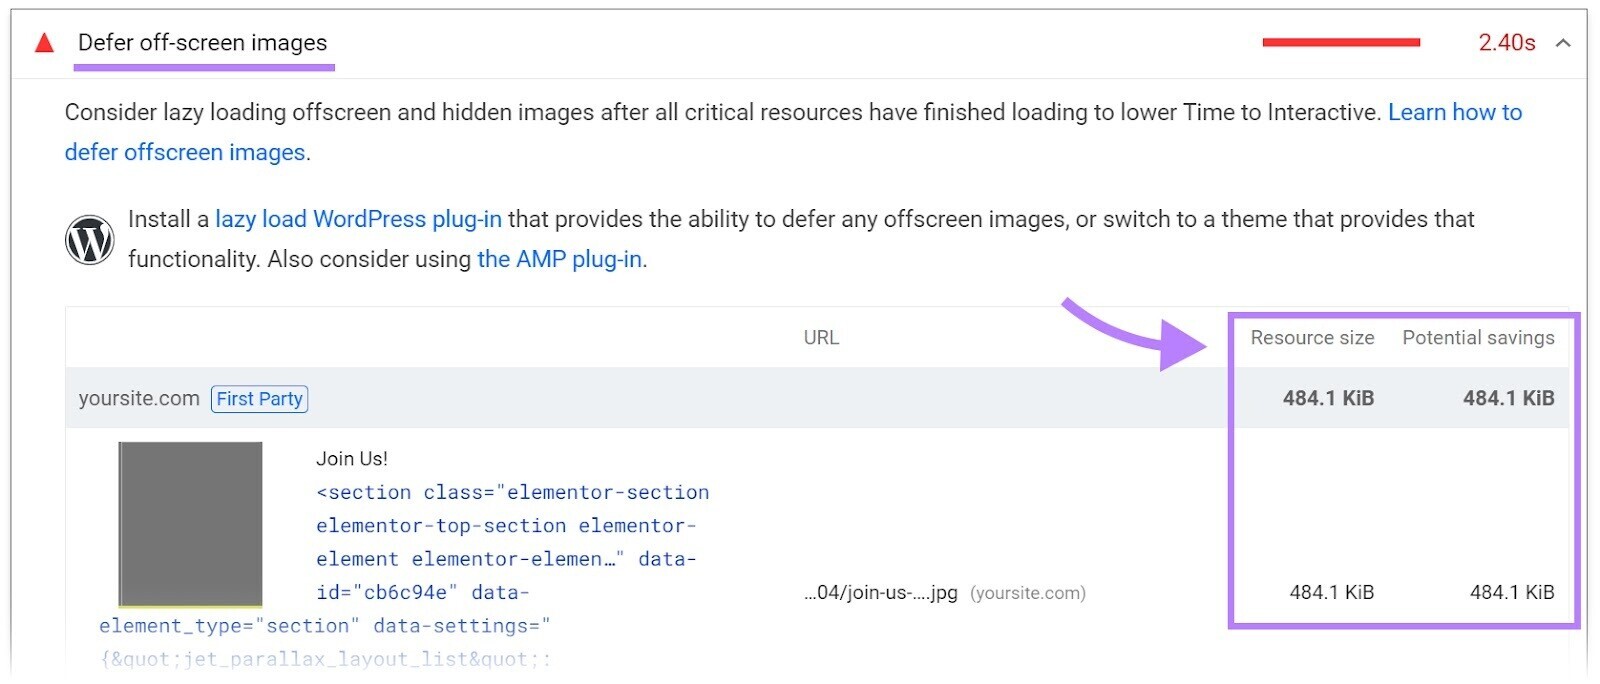 "Defer off-screen images" shows resource size and potential savings for images